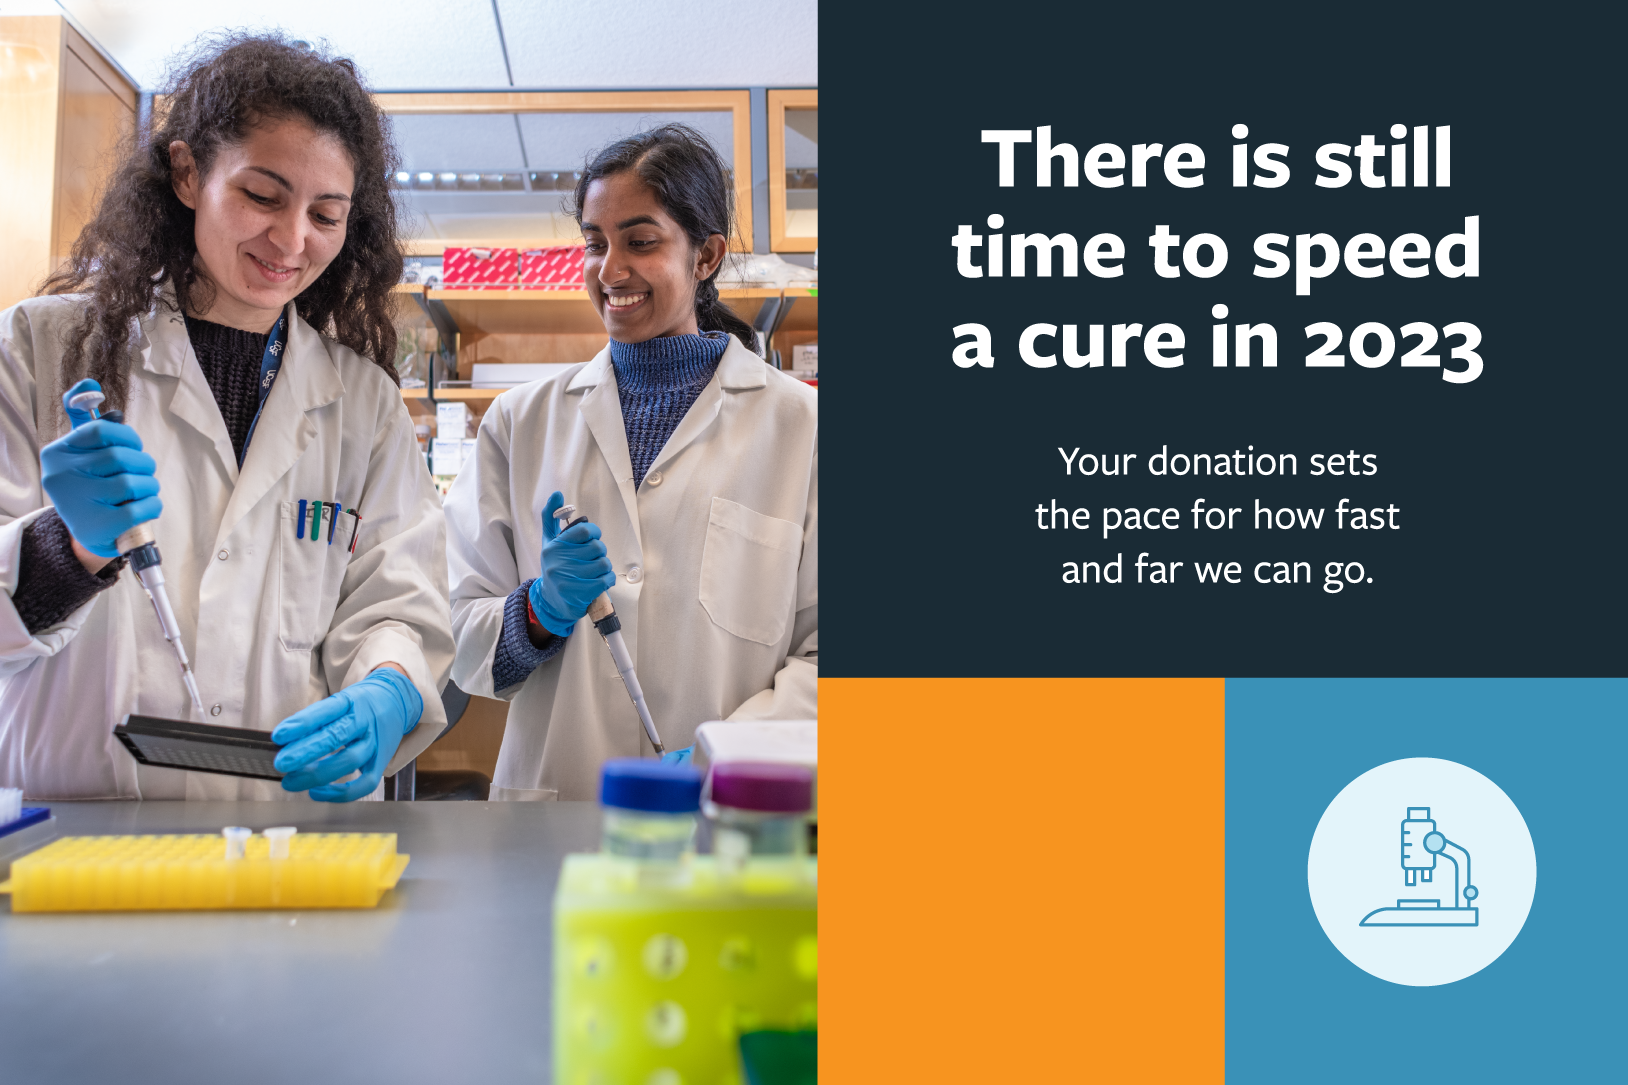 There is still time to speed a cure in 2023. Your donation sets the pace for how fast and far we can go.